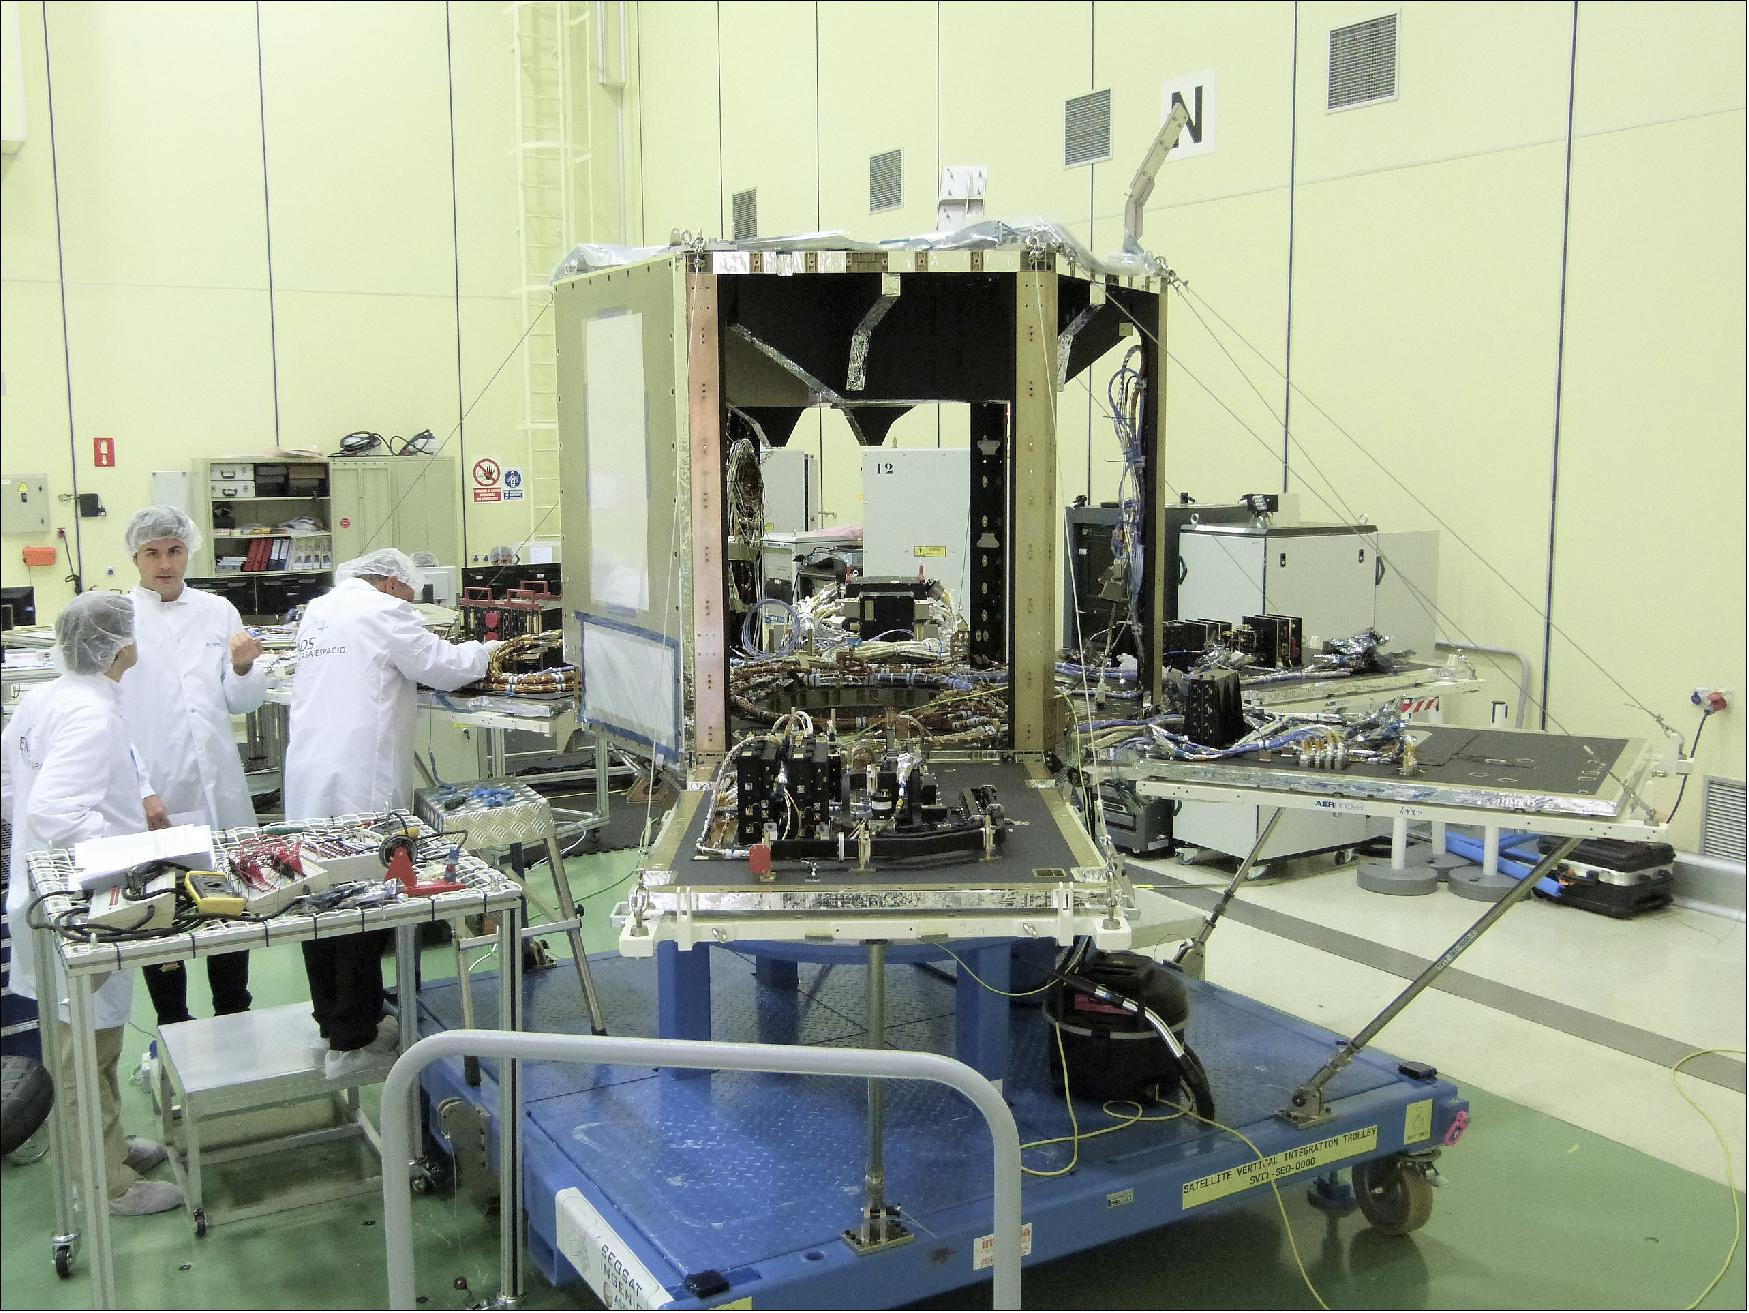 Figure 16: SEOSAT/Ingenio in the cleanroom at Airbus in Spain. The mission will provide high-resolution multispectral images of the environment for applications such as cartography, monitoring land use, urban management, water management, risk management and security. While SEOSAT/Ingenio is a Spanish national mission, it has resulted thanks to an international collaborative effort. The mission is funded by Spain's Center for the Development of Industrial Technology (CDTI) but developed and managed by ESA in the context of the European Earth Observation Architecture (image credit: Airbus DS, Spain)